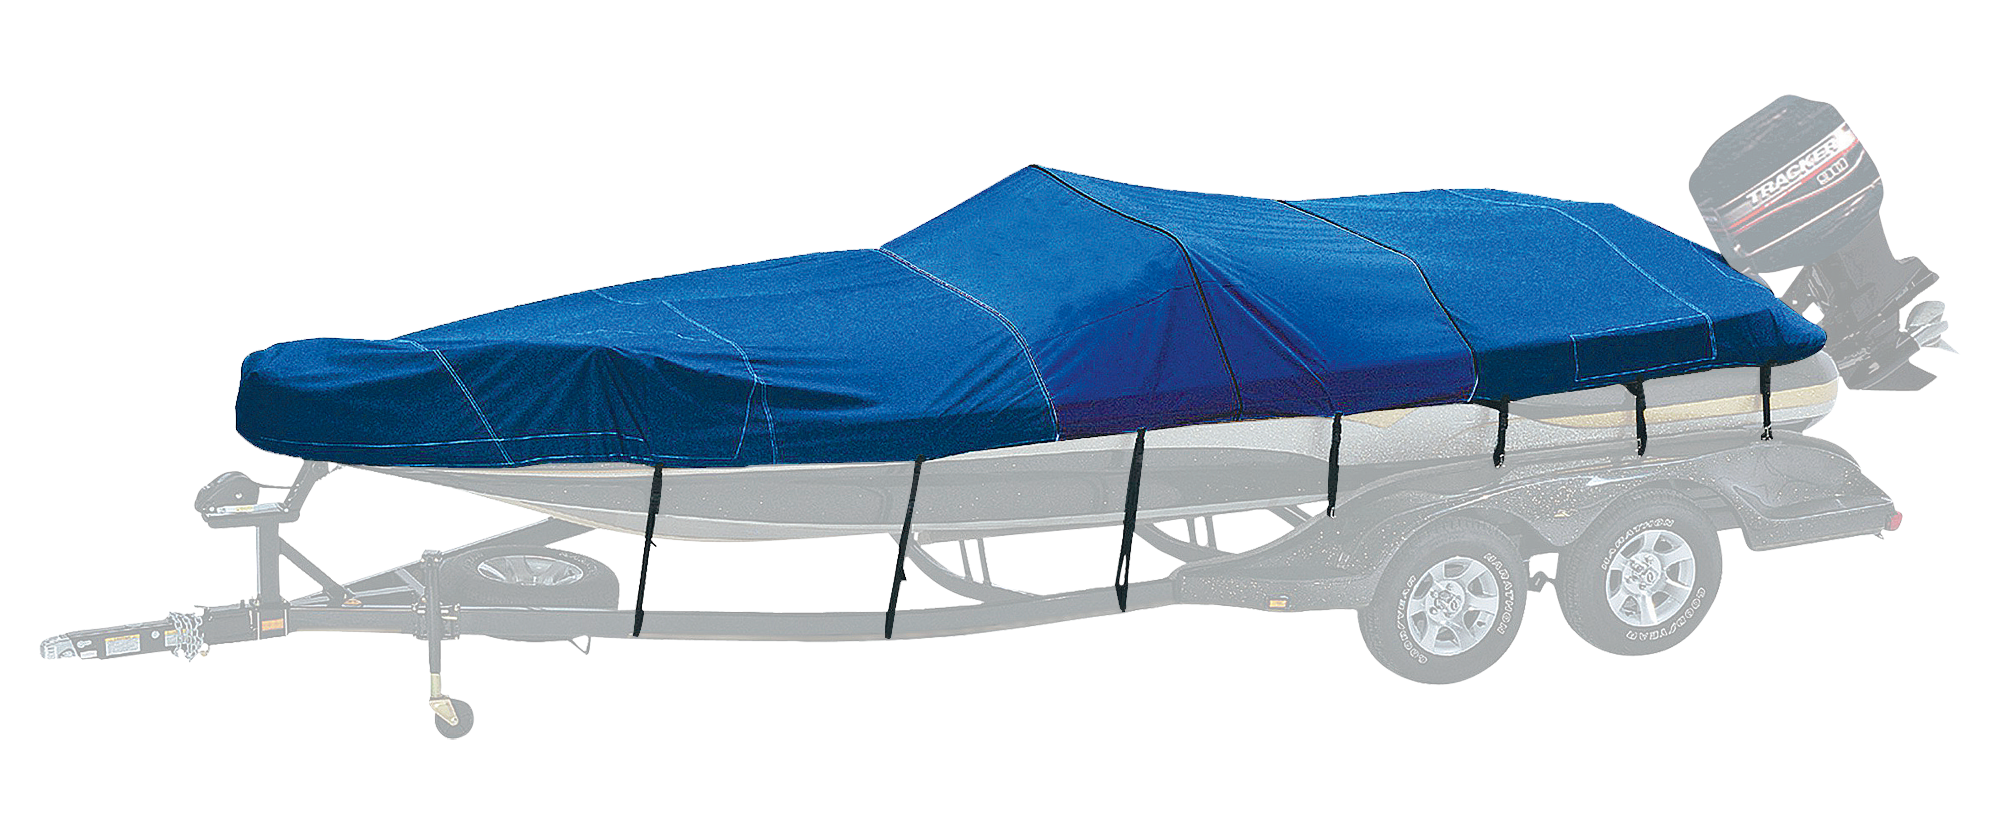 Bass Pro Shops Exact Fit Boat Cover by Westland - Tahoe - '04-'05 254 DB Standard I/O w/Ext. - Sharkskin Blue